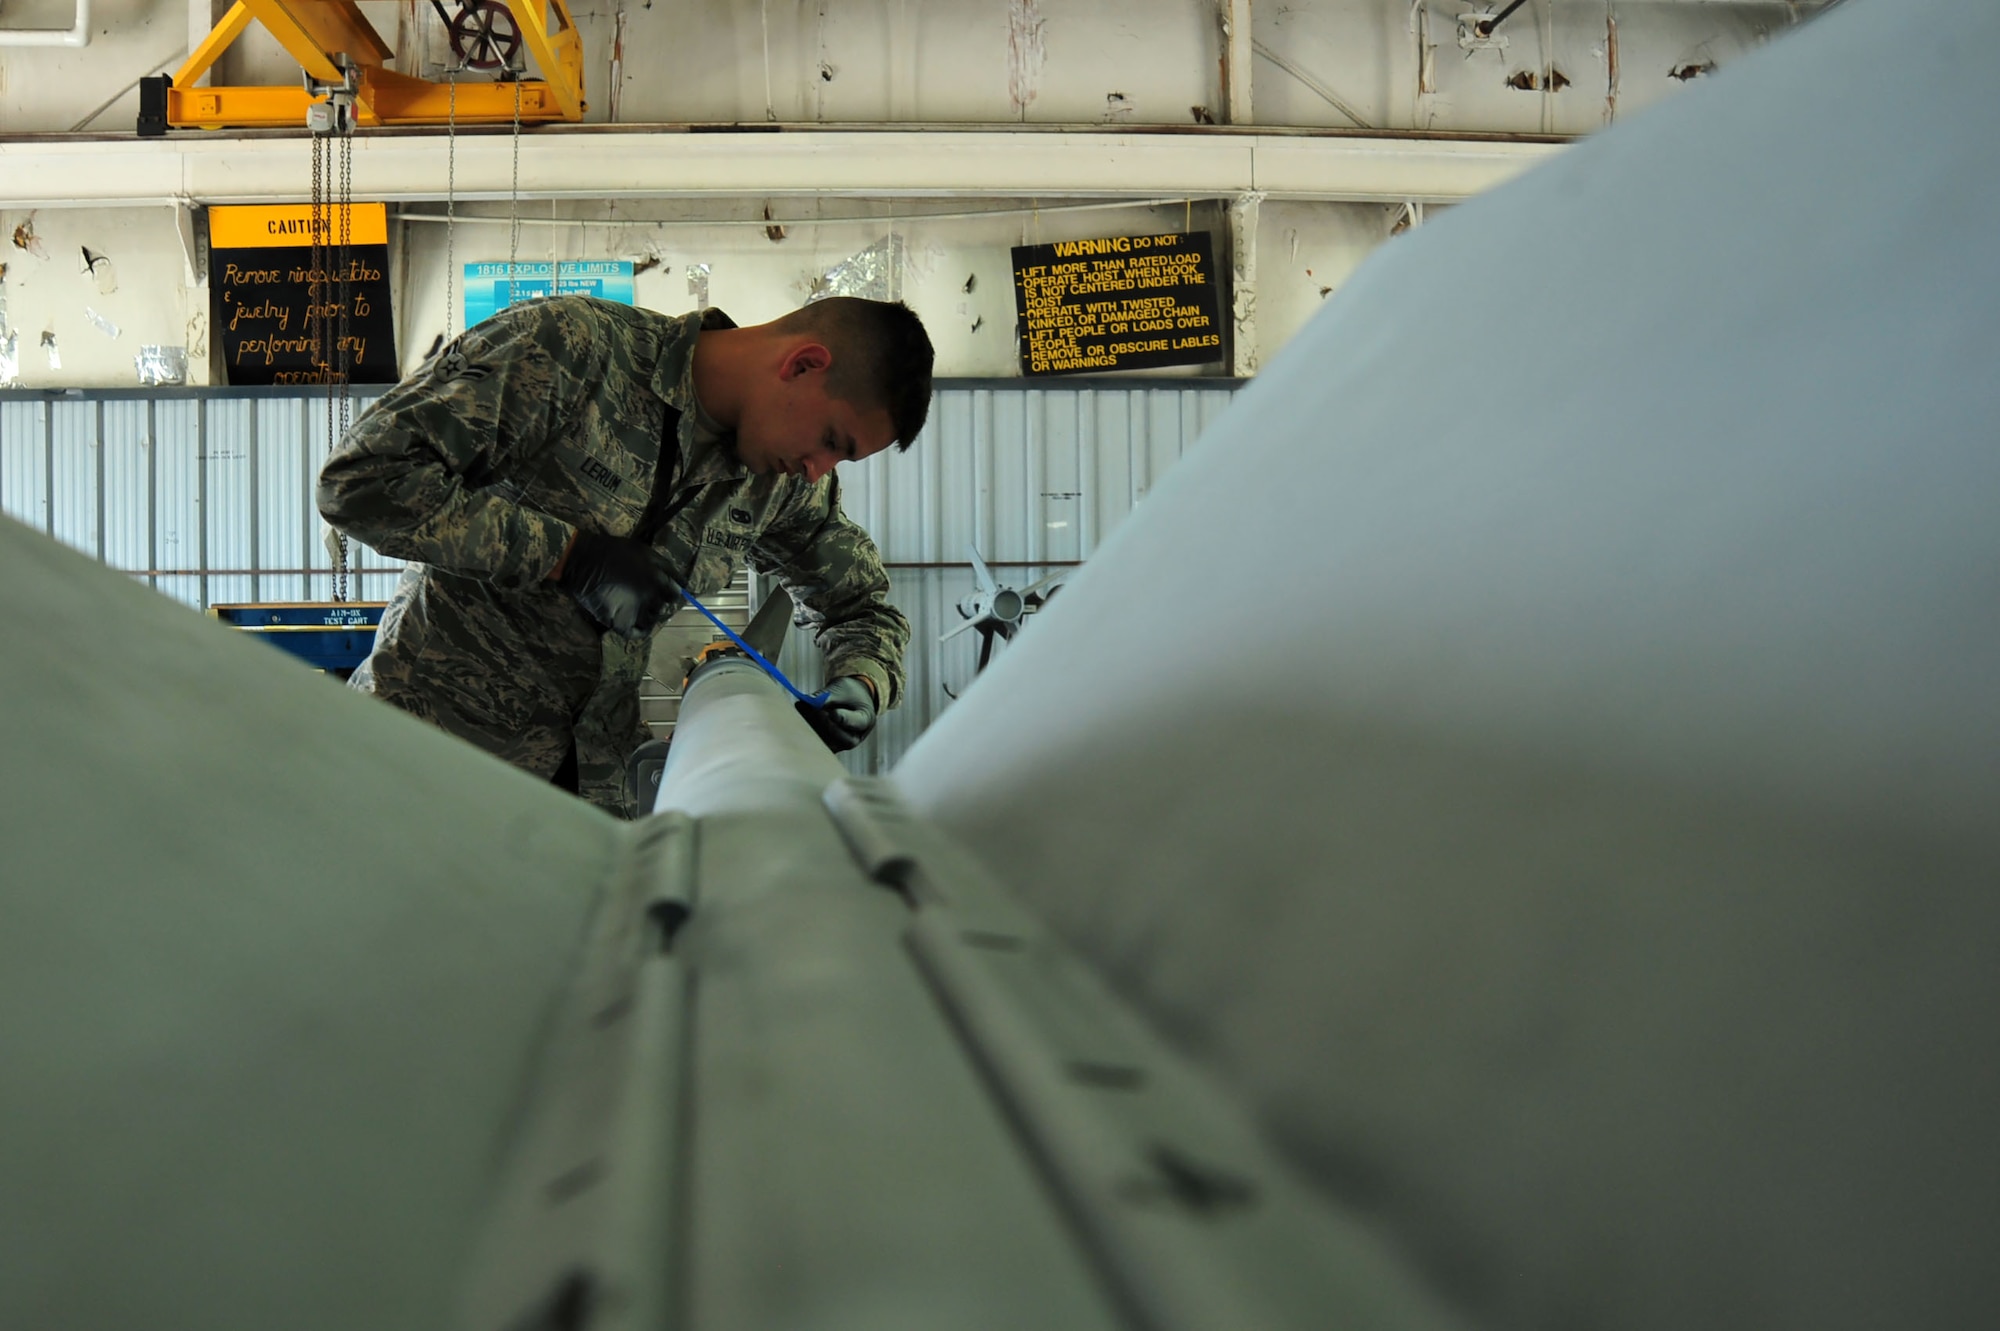 U.S. Air Force Airman 1st Class Ty Lerum, 20th Equipment Maintenance Squadron precision guided munitions technician, places tape on an AIM-9 Sidewinder missile at Shaw Air Force Base, S.C., June 27, 2017. The tape isolated areas of the munition that needed to be repainted due to wear or exposure of bare metal following the removal of rust. (U.S. Air Force photo by Airman 1st Class Kathryn R.C. Reaves)